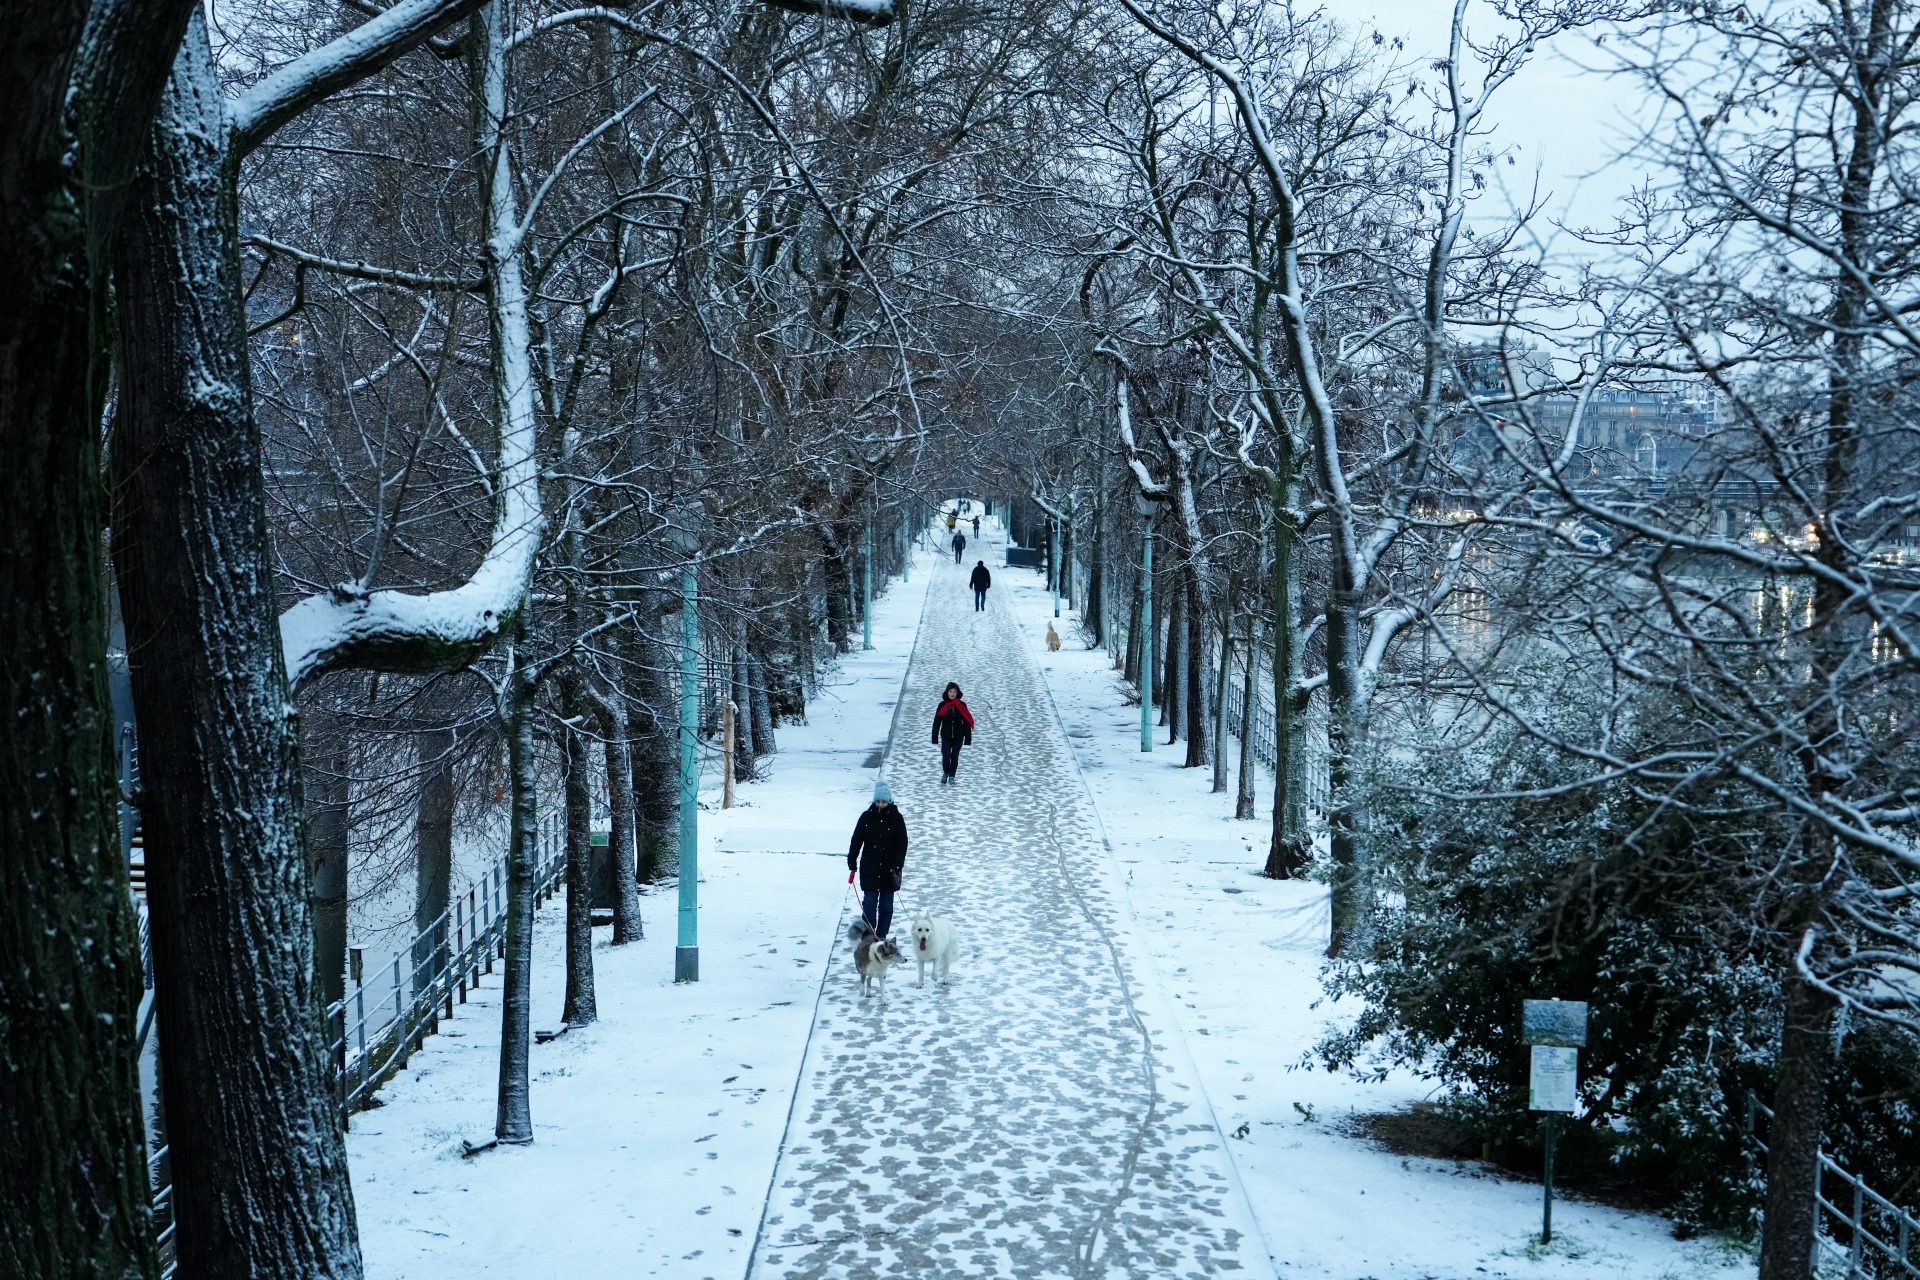 Dream away while you look at Paris covered in snow!